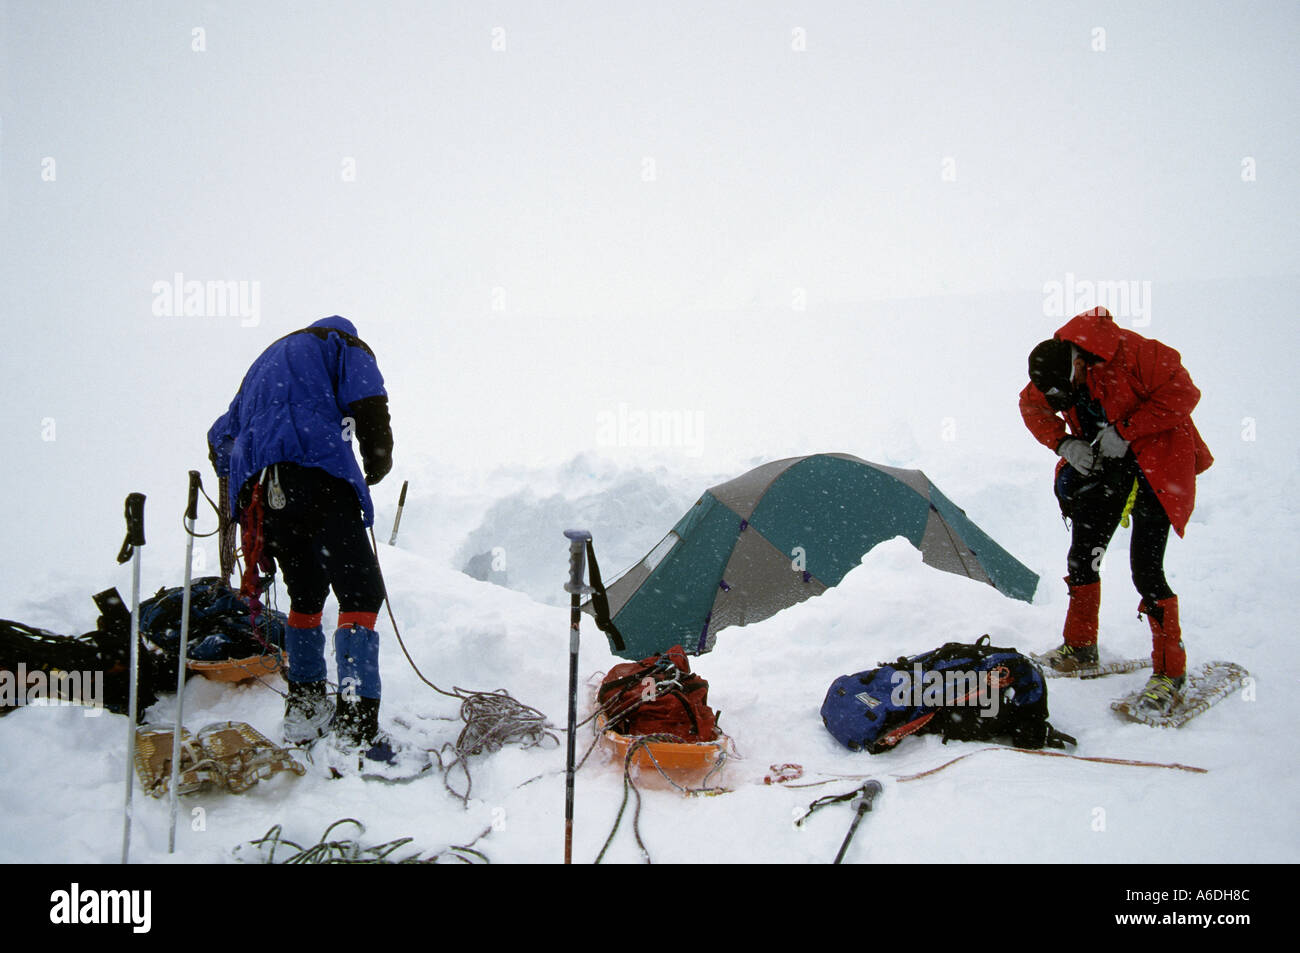 alaska denali national park climbers prepare to depart camp during a whiteout snowstorm on the Kahiltna glacier Stock Photo